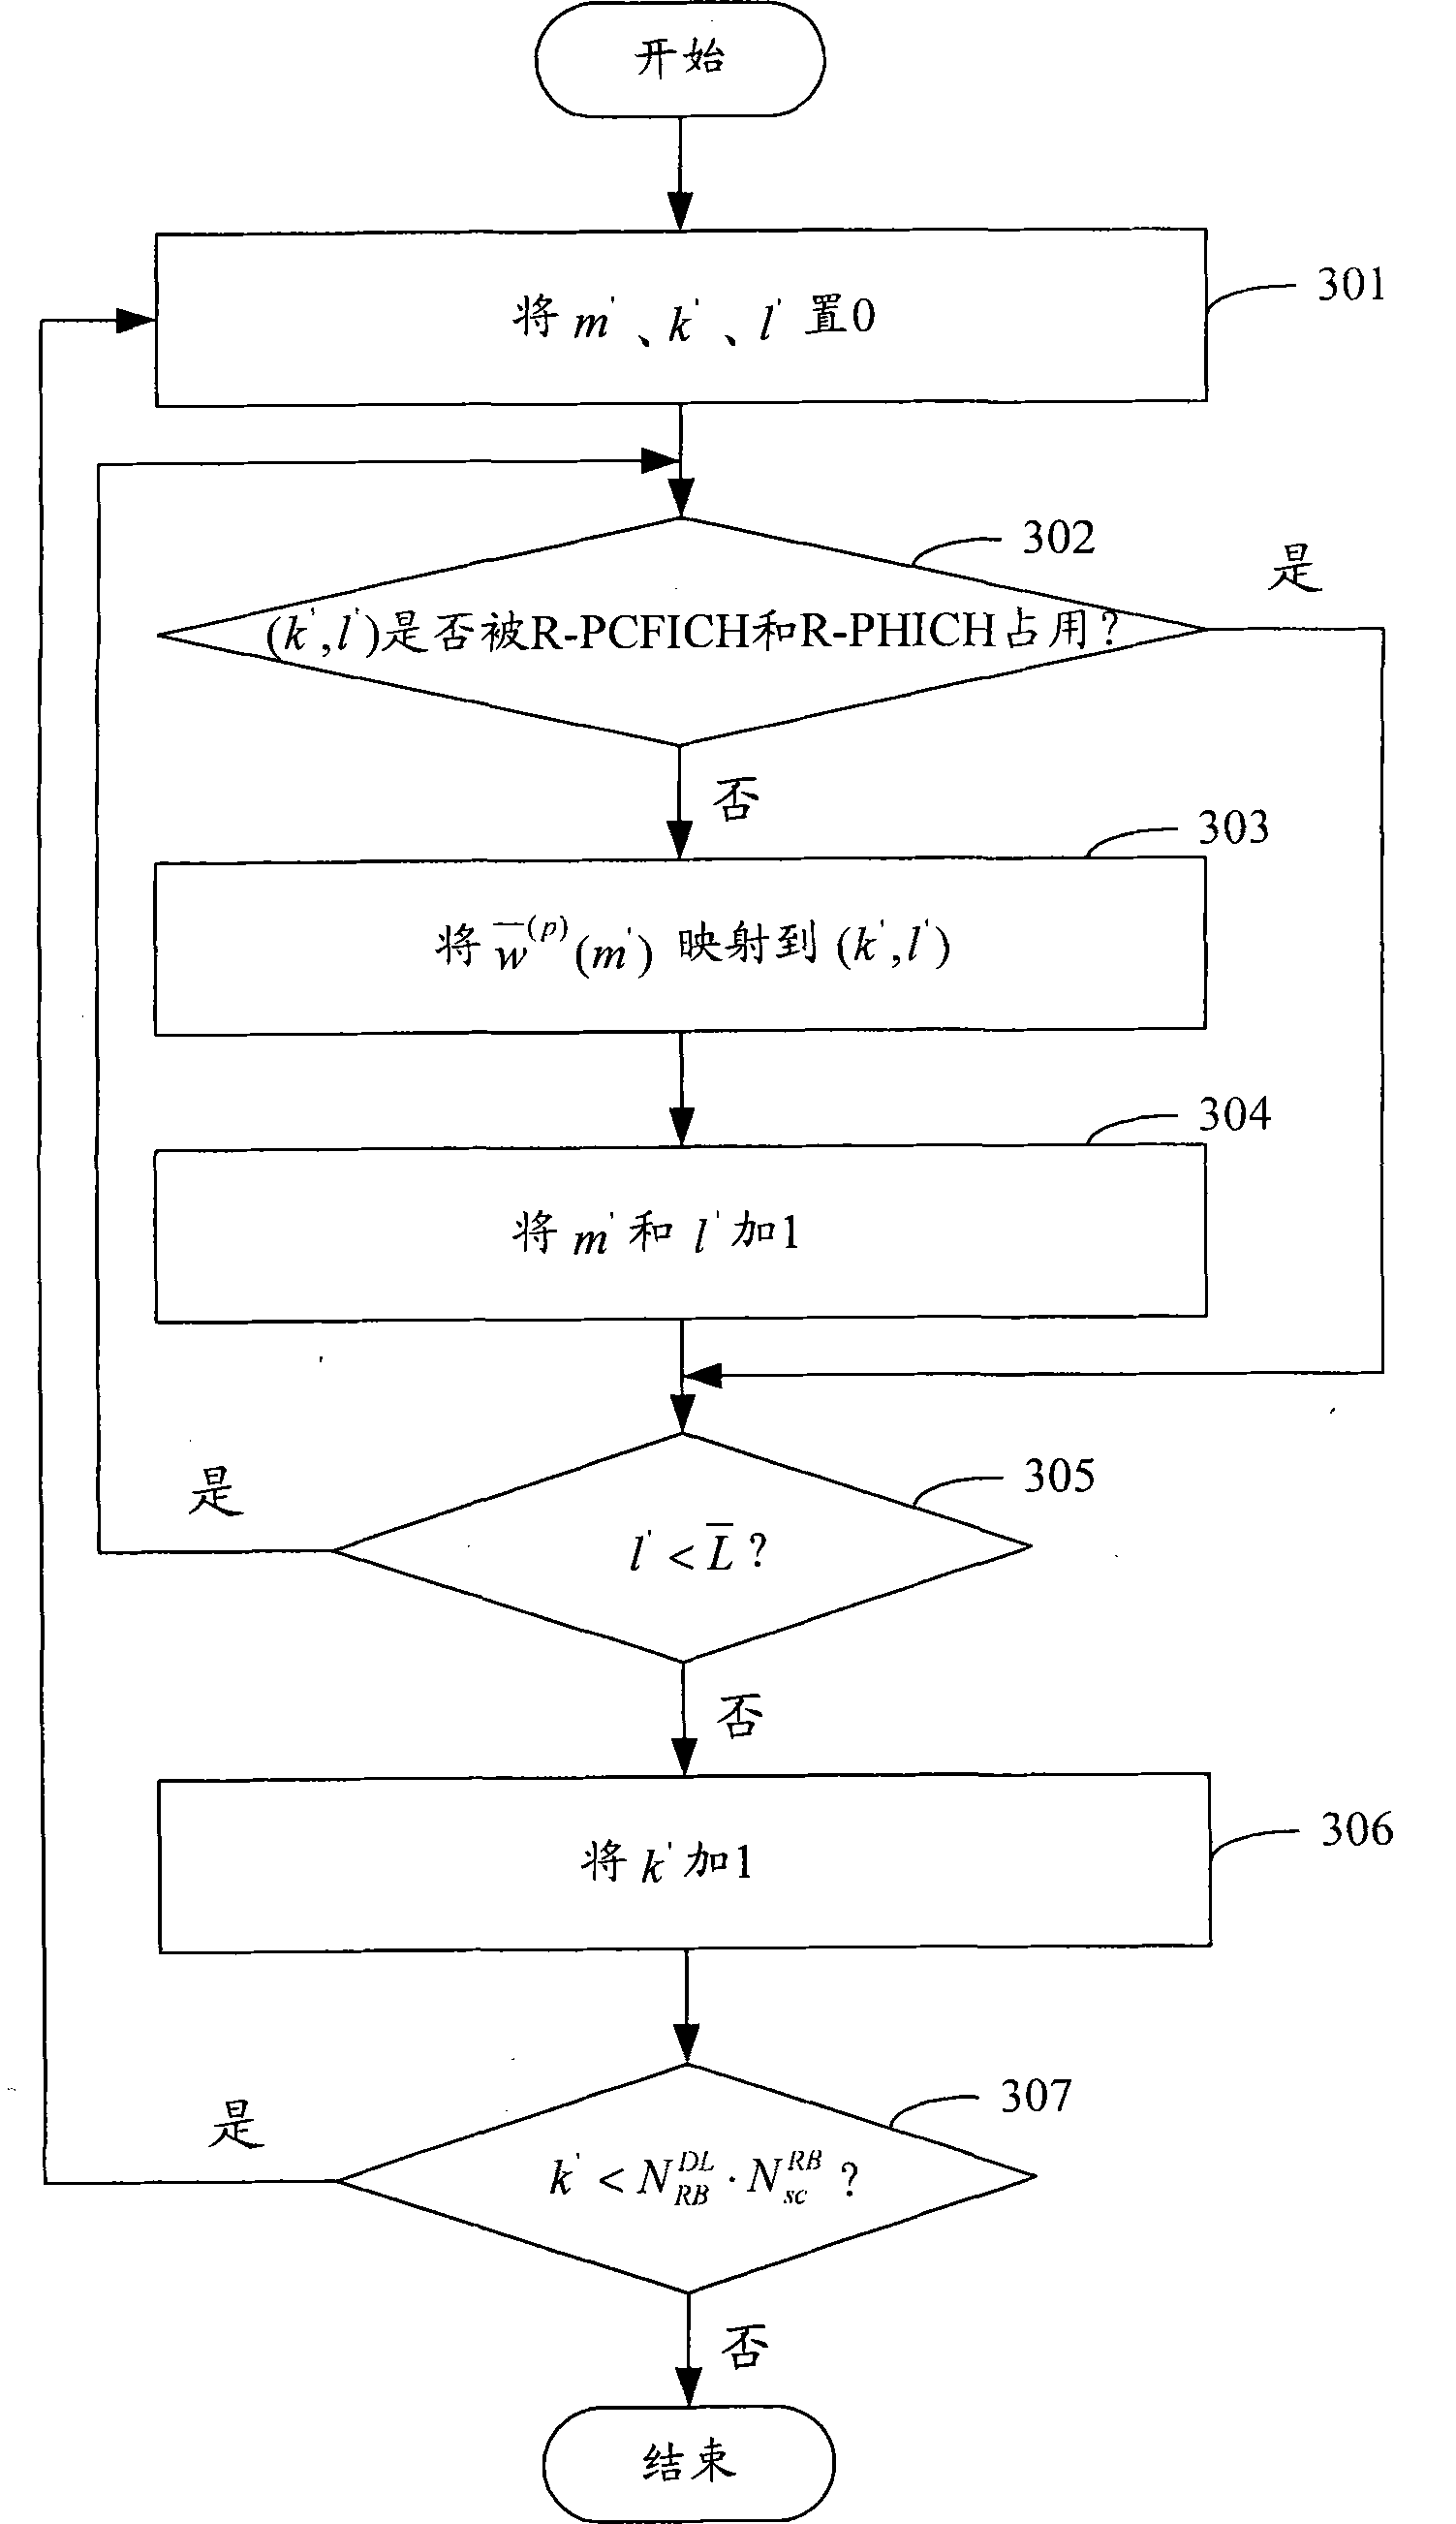 Transmission processing method and system of control information from base station to relay node